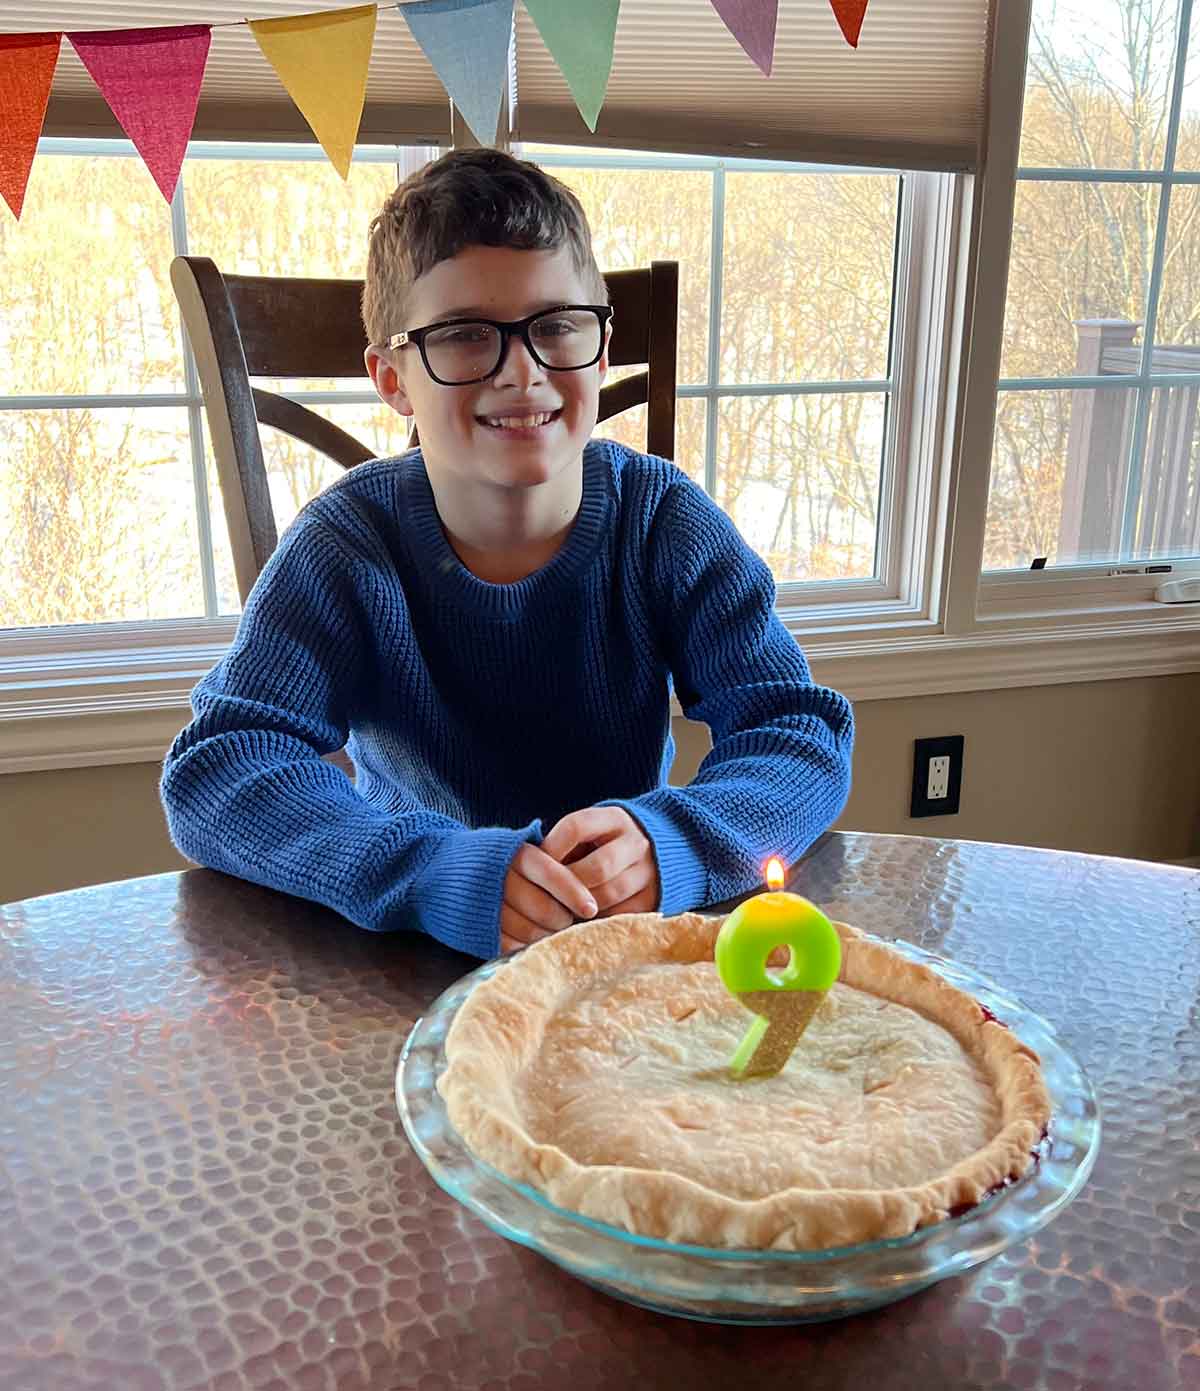 Boy in a blue sweater and black glasses sitting in front of a pie with a number nine candle in the middle of it.